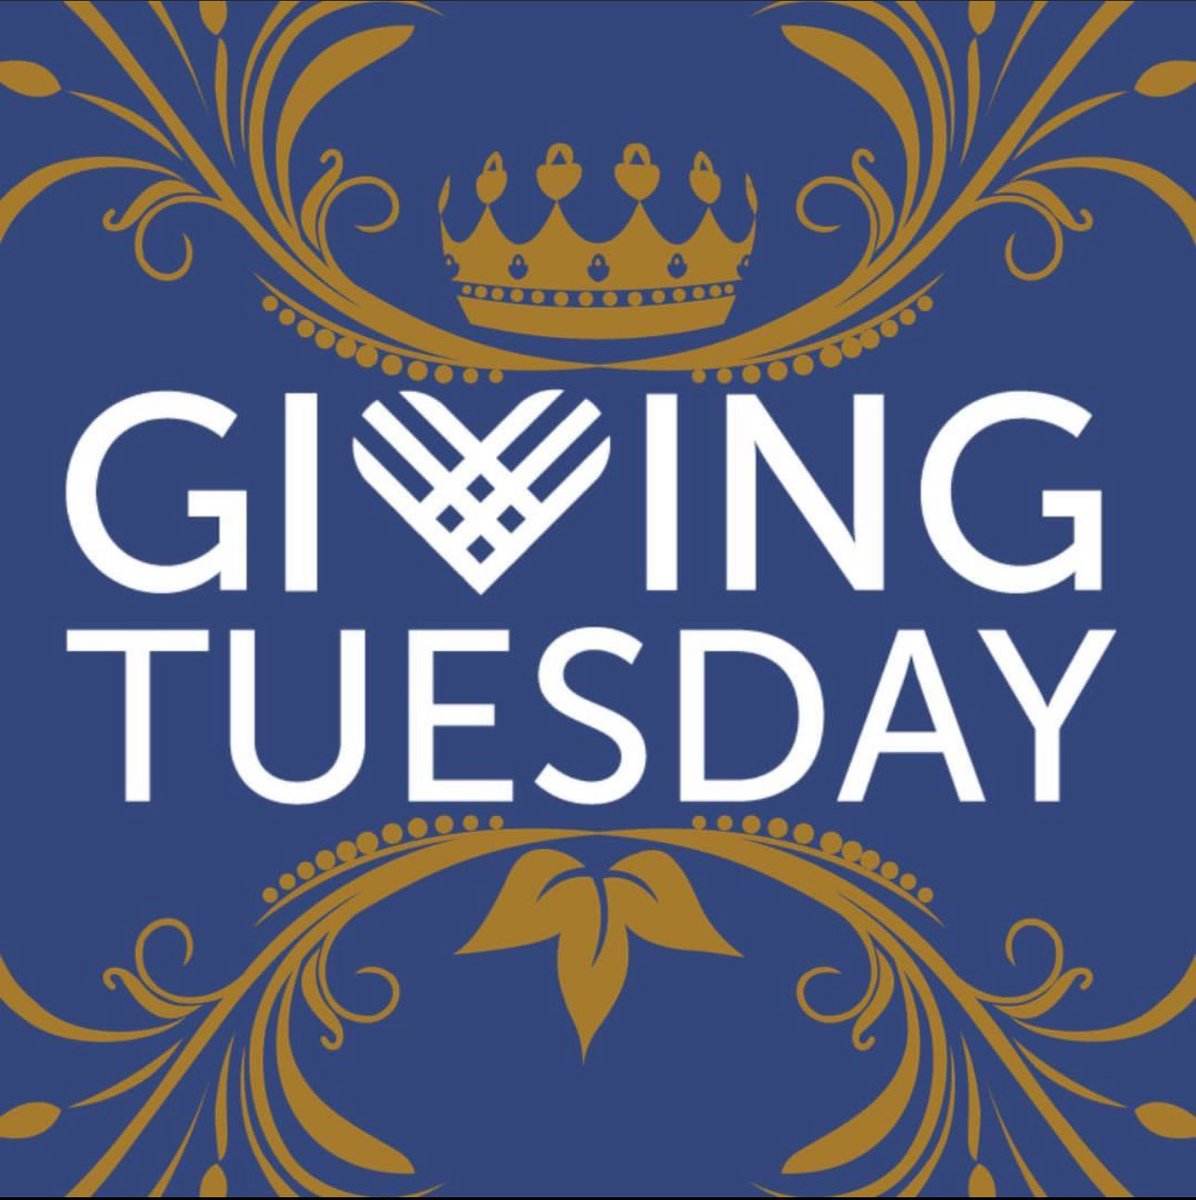 #GivingTuesday! Let's support those who make hospitality a welcoming experience. Share the joy of giving by donating to @chefjoseandres  @WCKitchen , @nokidhungry , @FeedingAmerica , local food banks, @mentorBKB ,  @beardfoundation , and more 
#pastryteamusa  #GiveBack